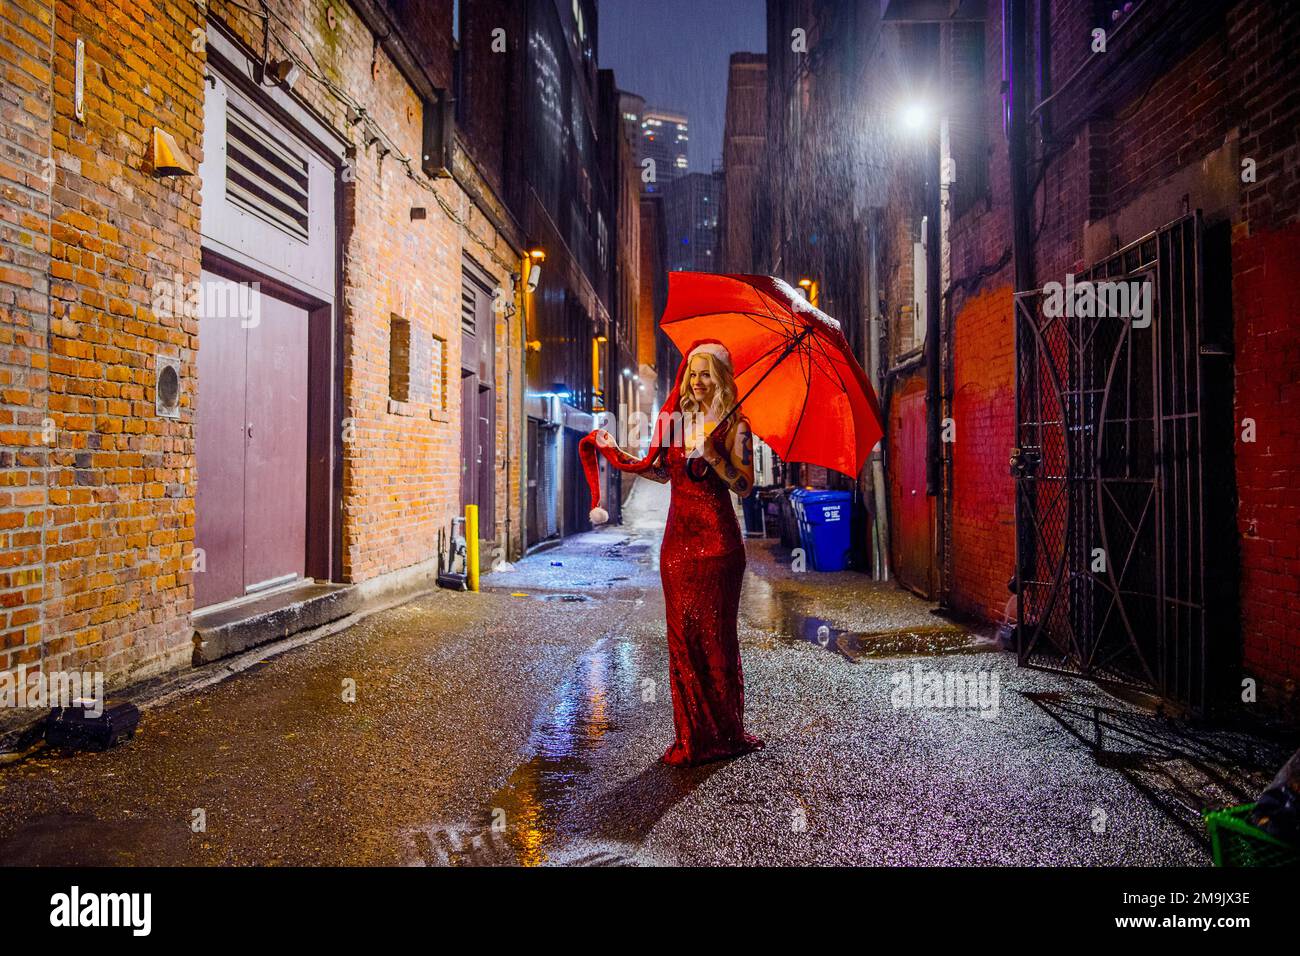 Woman with red dress, Santa hat and umbrella in alley, Seattle, Washington, USA Stock Photo